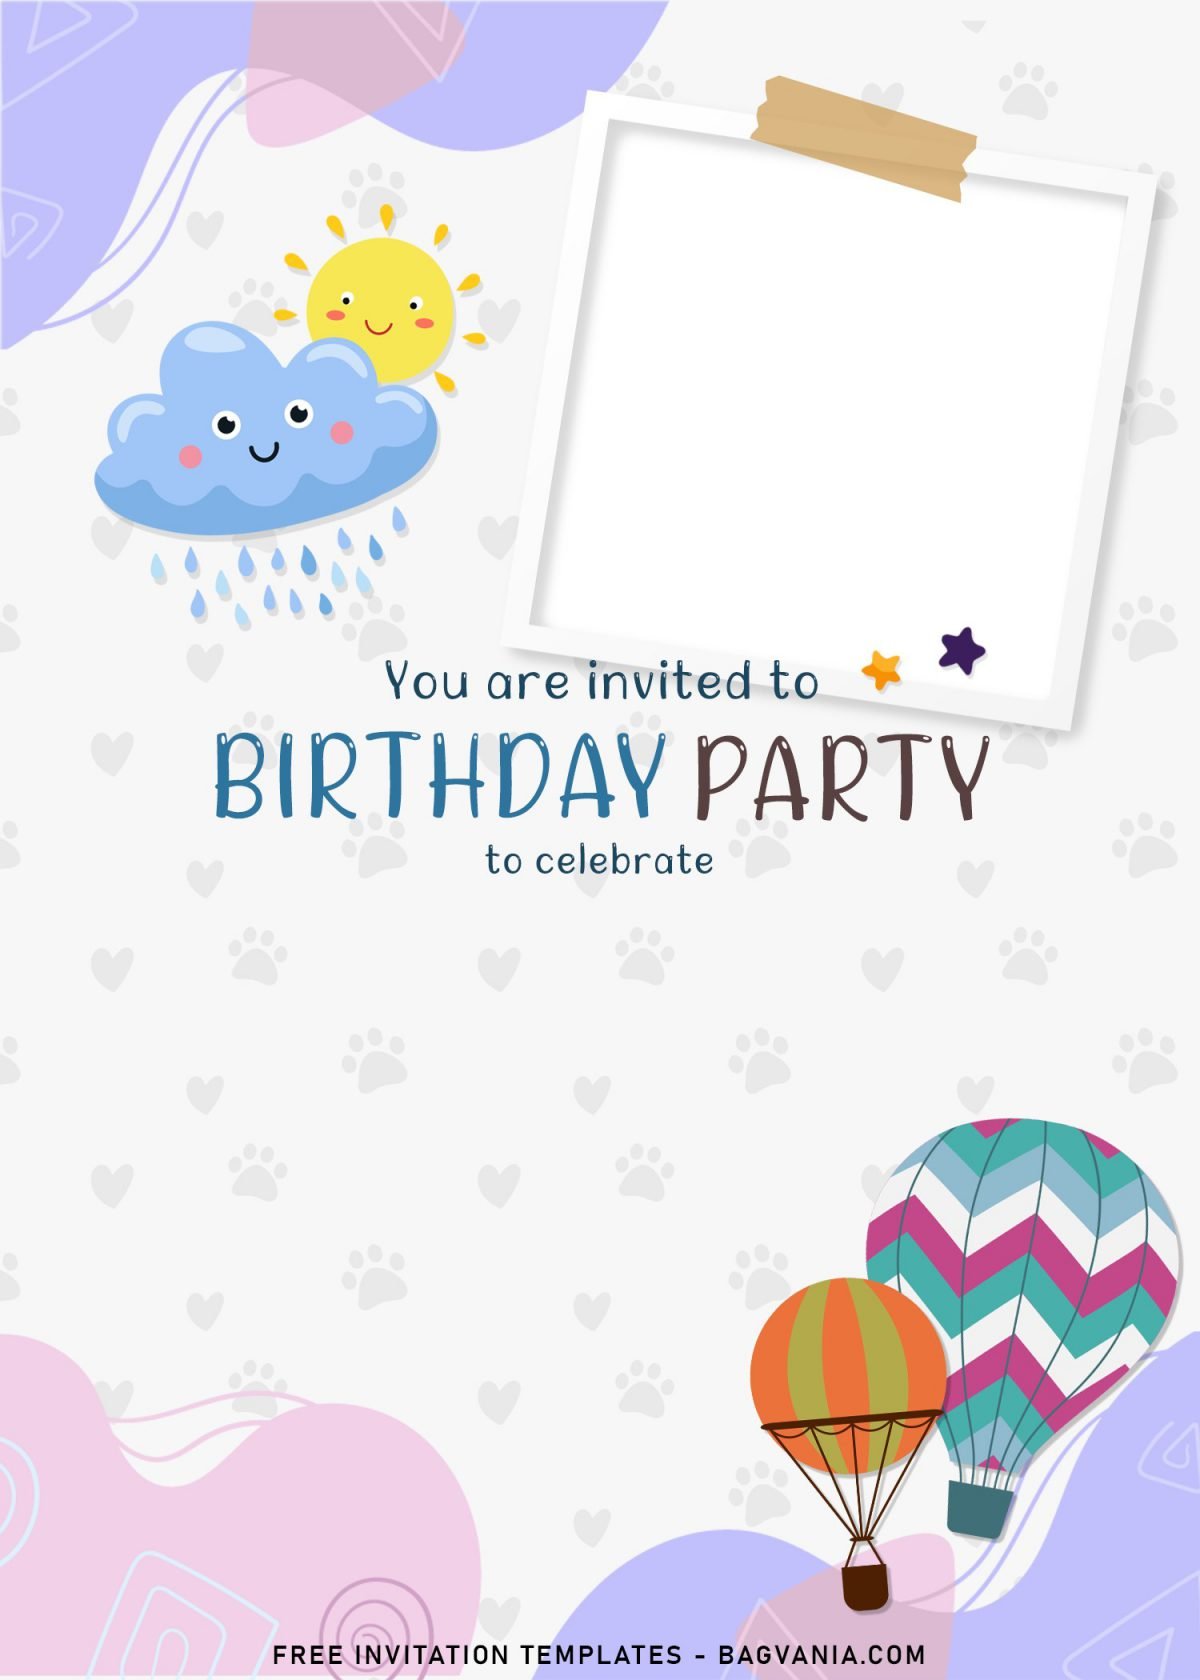 8+ Colorful Hand Drawn Birthday Invitation Templates For Your Kid's Birthday and has cute sun and cloud